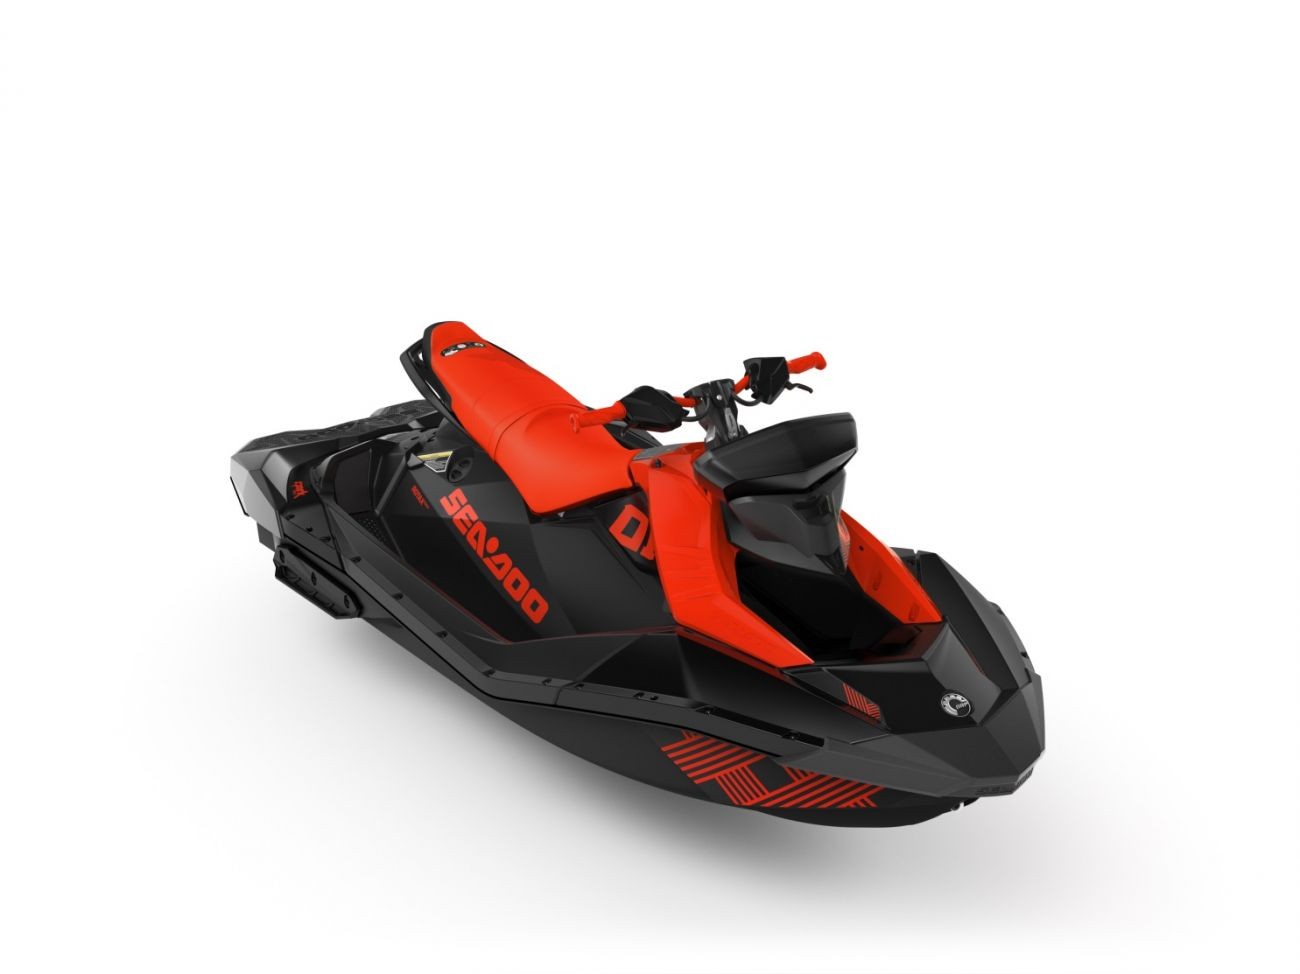  WATERSPORTS SEA-DOO_IMAGERY REC_LITE MY21 SEA_MY21_RECLT_Spark_Trixx_90__180920142233_lowres